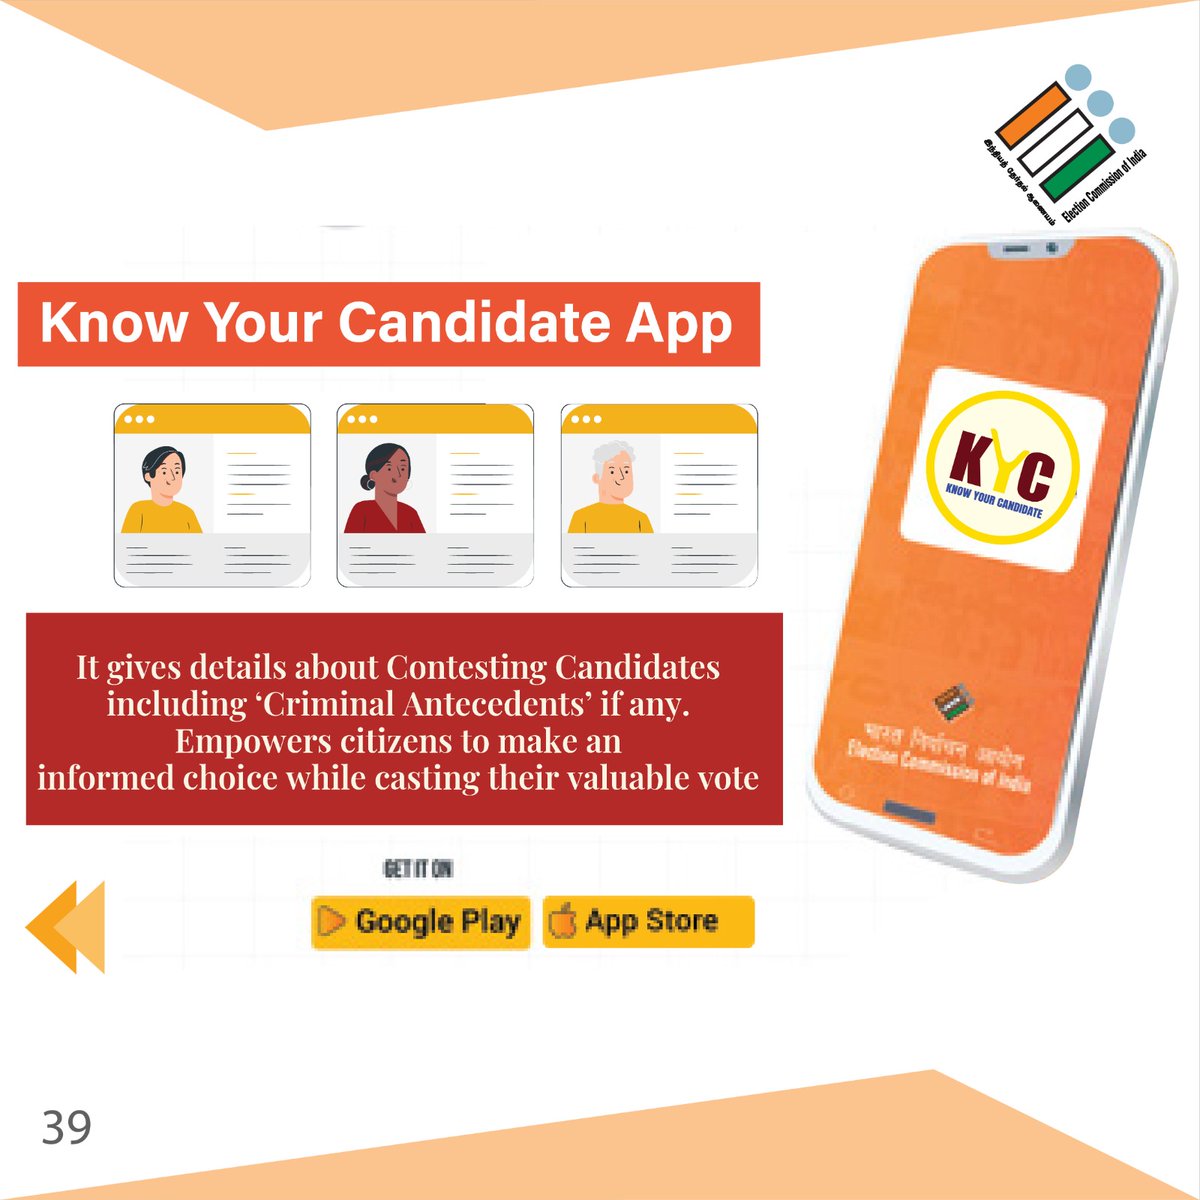 To know about your candidate.
Download the “Know Your Candidate App”
#SVEEP
#ChiefElectoralOfficer_TamilNadu
#LoksabhaElection2024